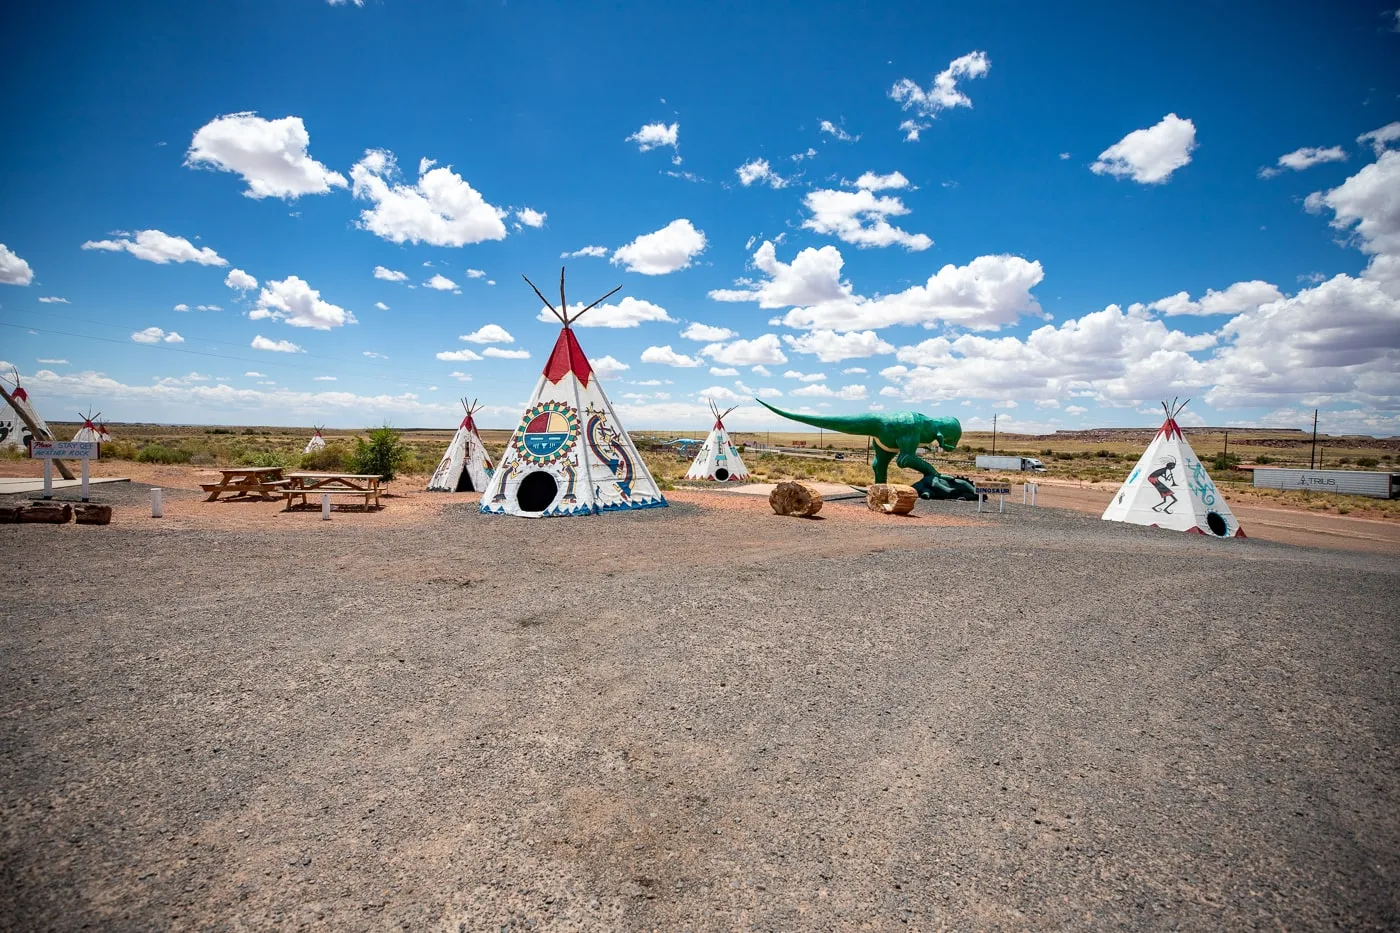 Painted Desert Indian Center in Holbrook, Arizona Route 66 Roadside Attraction